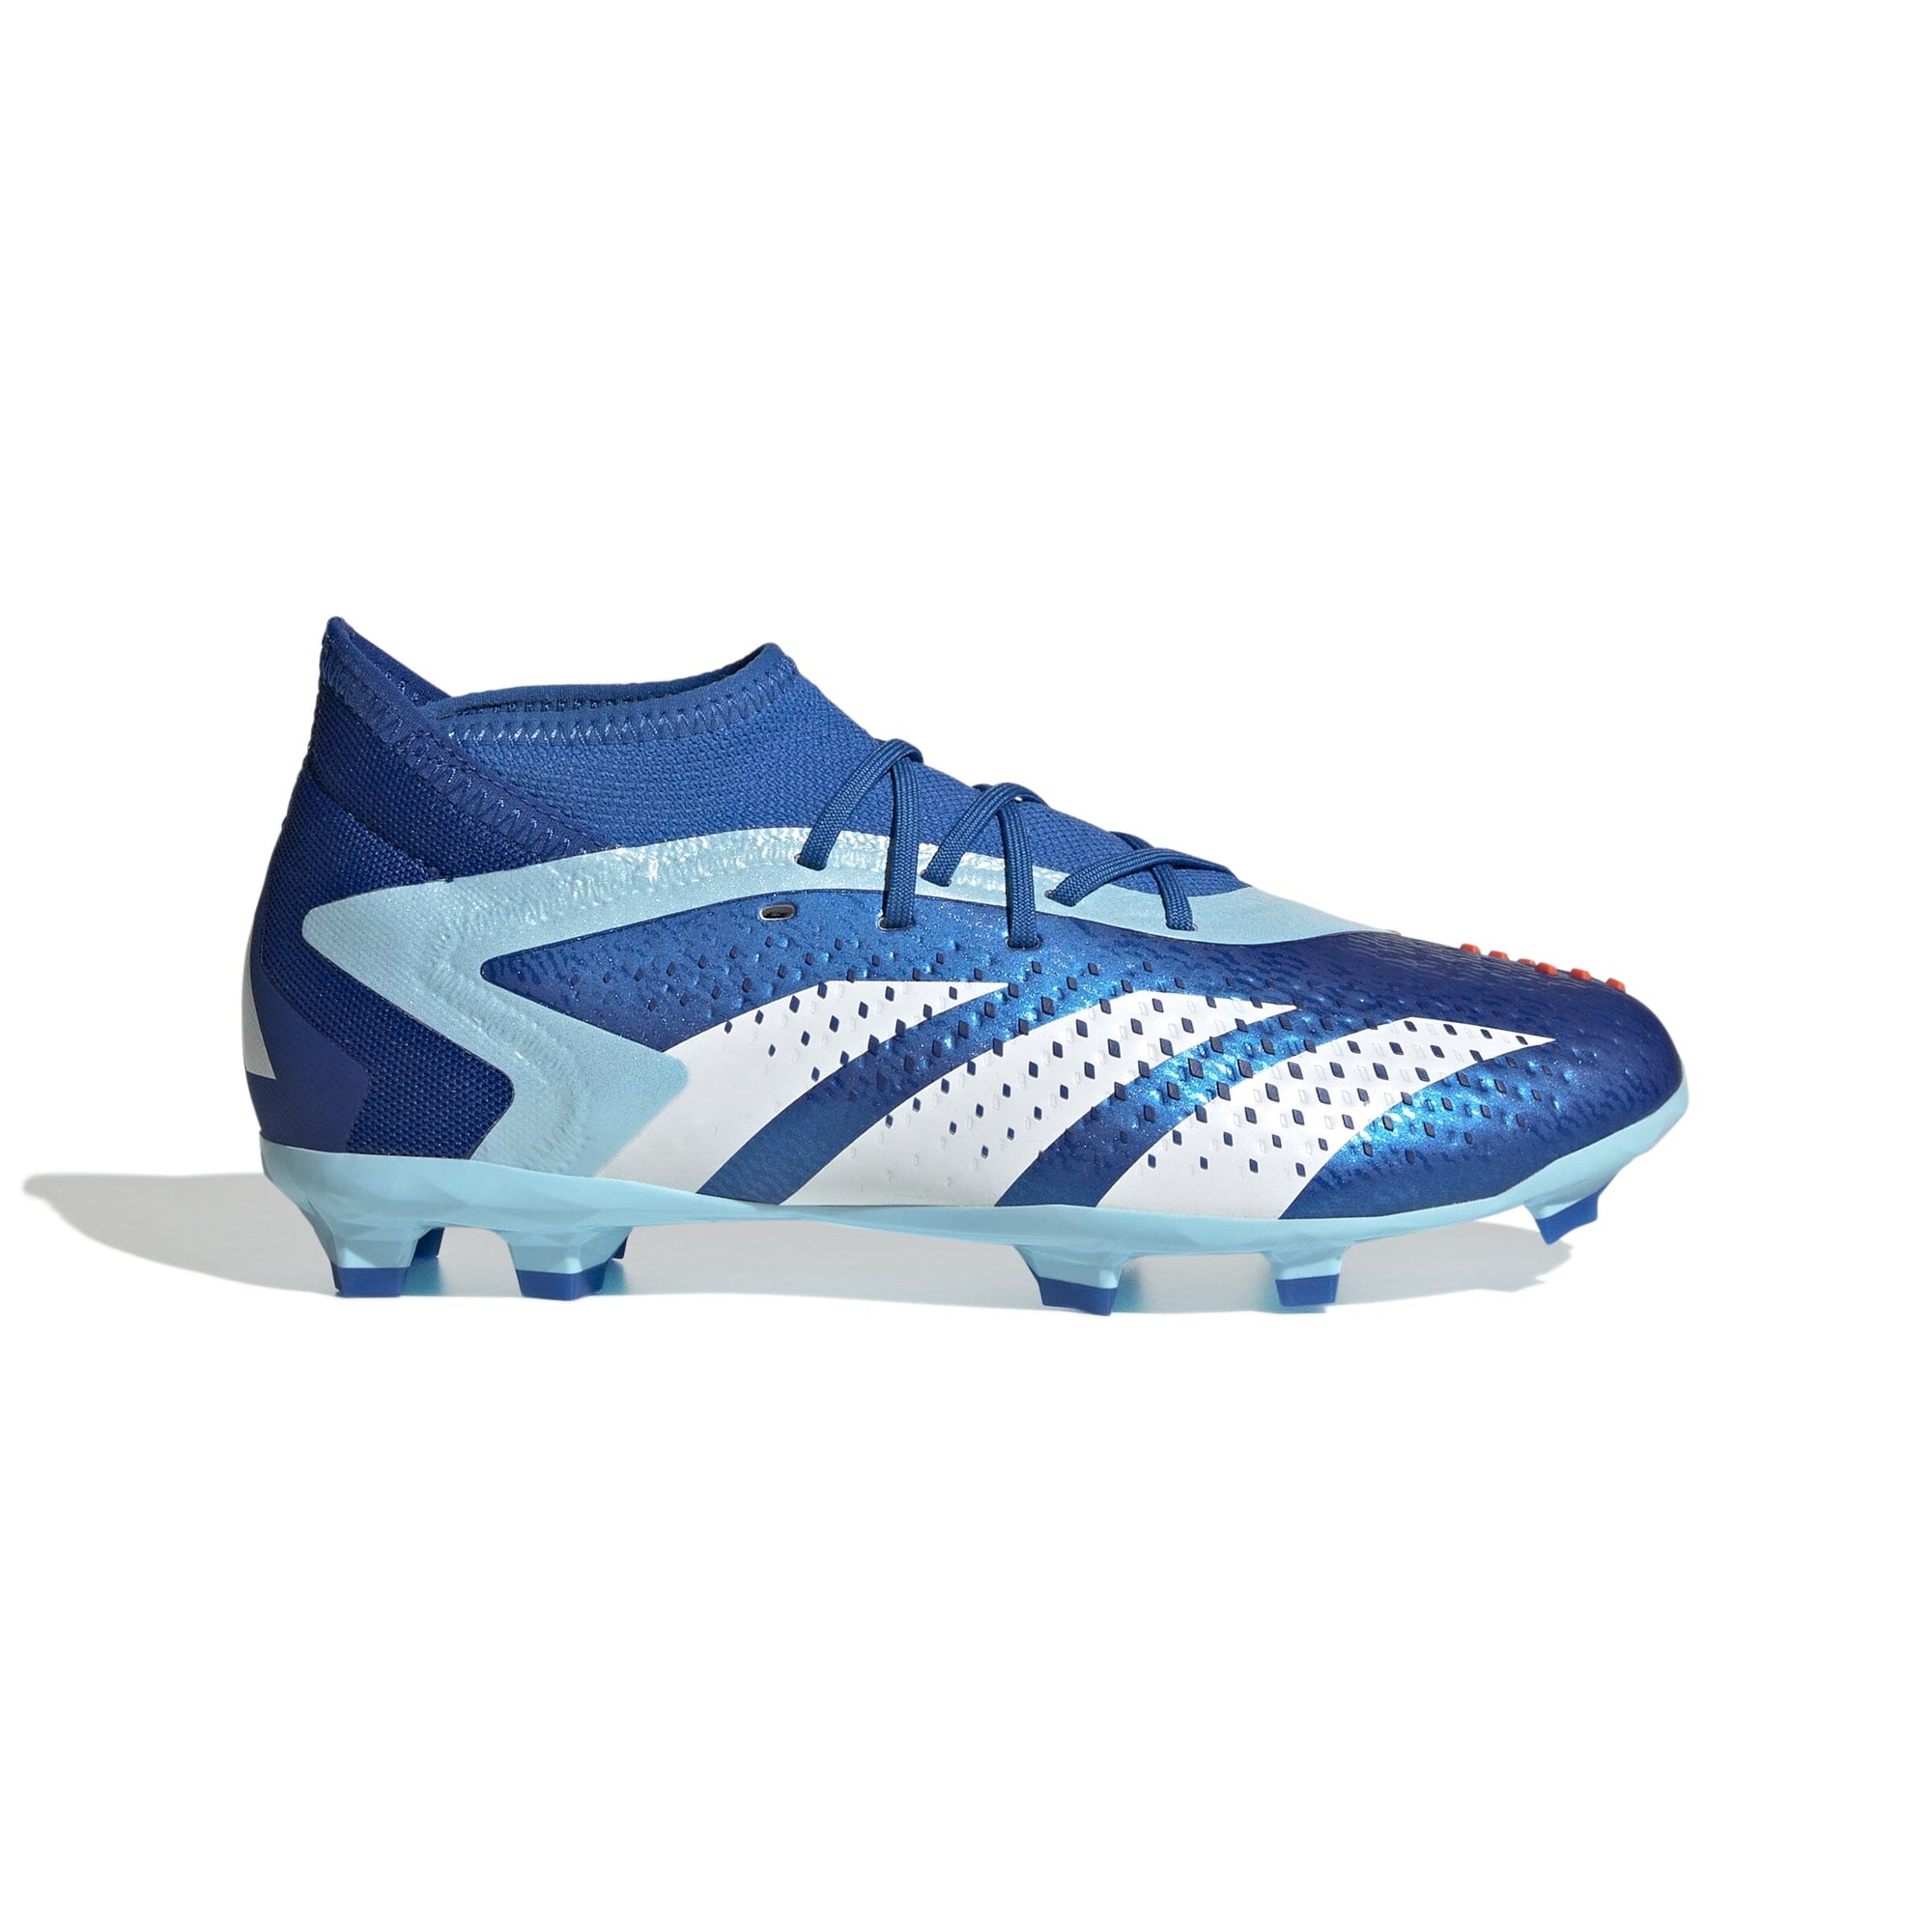 adidas Youth Predator Accuracy.1 Firm Ground Cleats | IE9499 Cleats Adidas 1 Bright Royal / FTWR White / Bliss Blue 